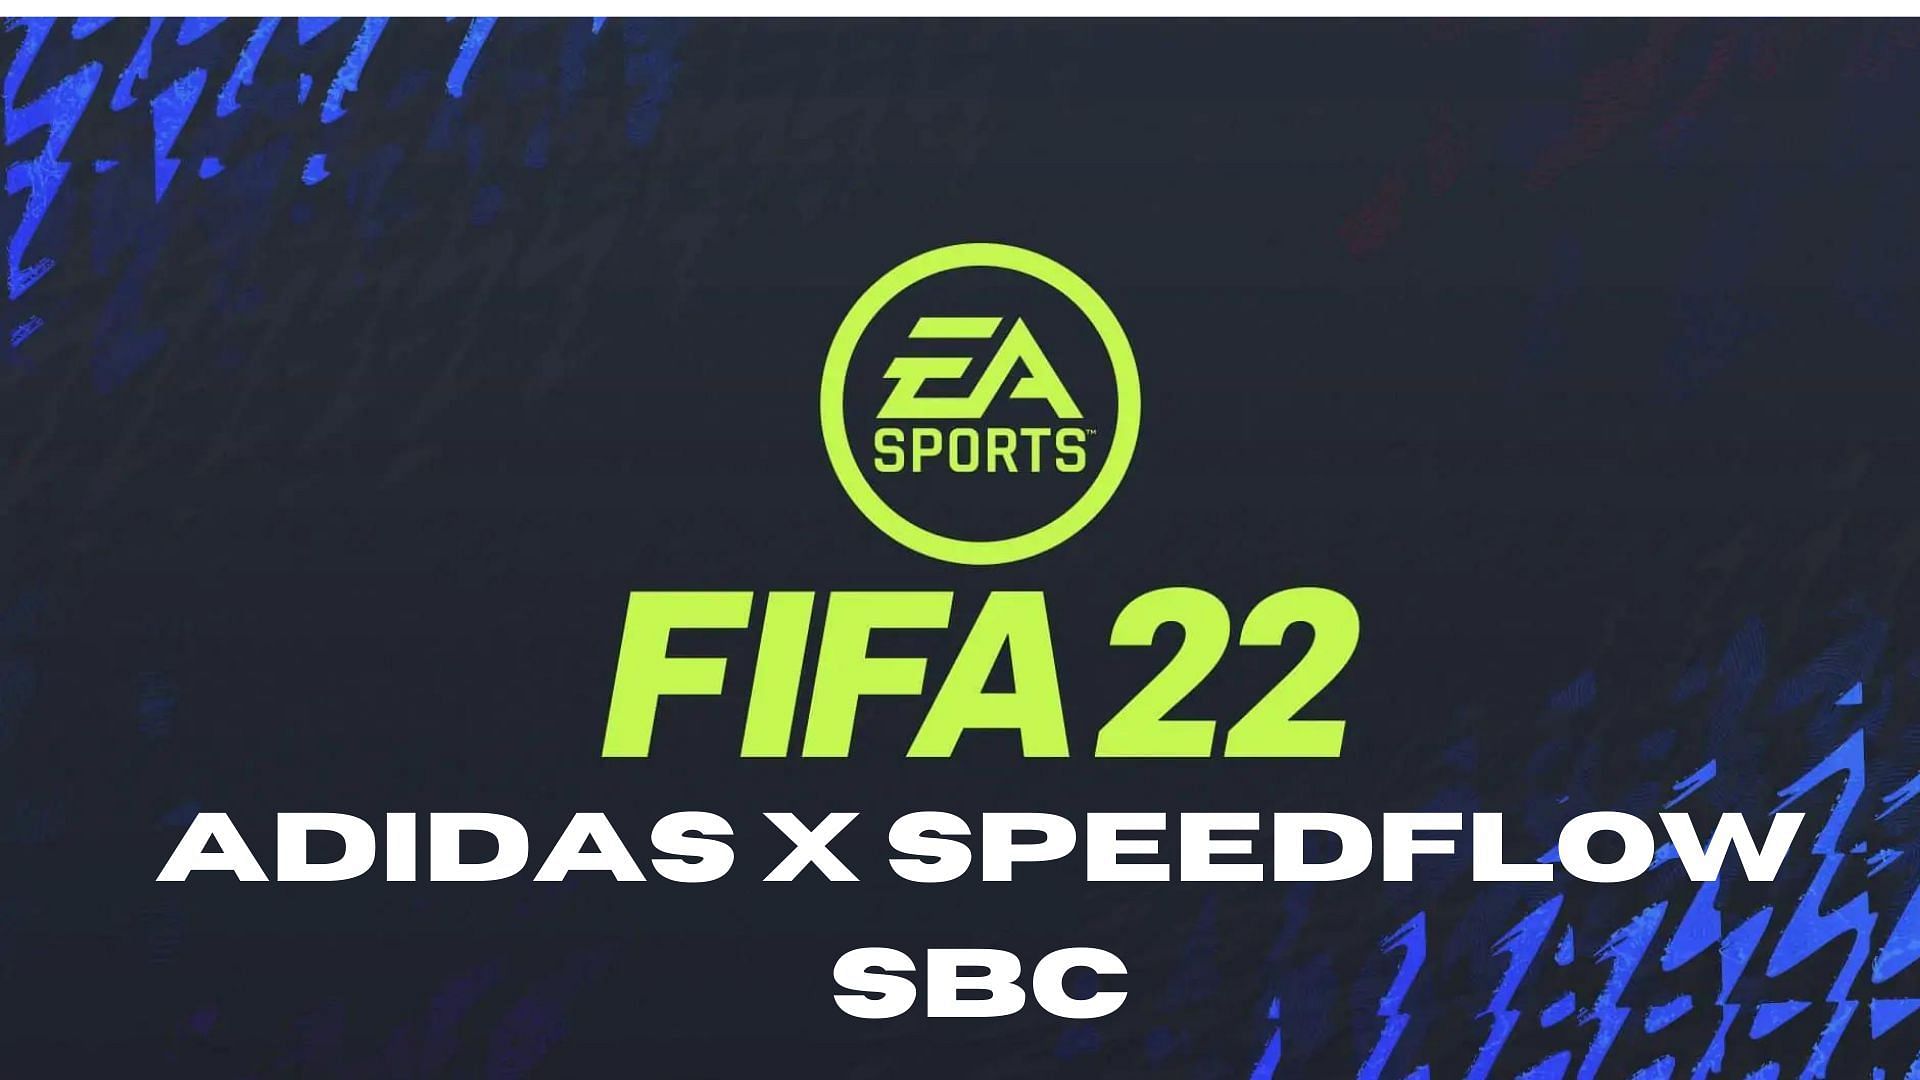 adidas NUMBERSUP - FIFA 22 Ultimate Team - EA SPORTS Official Site